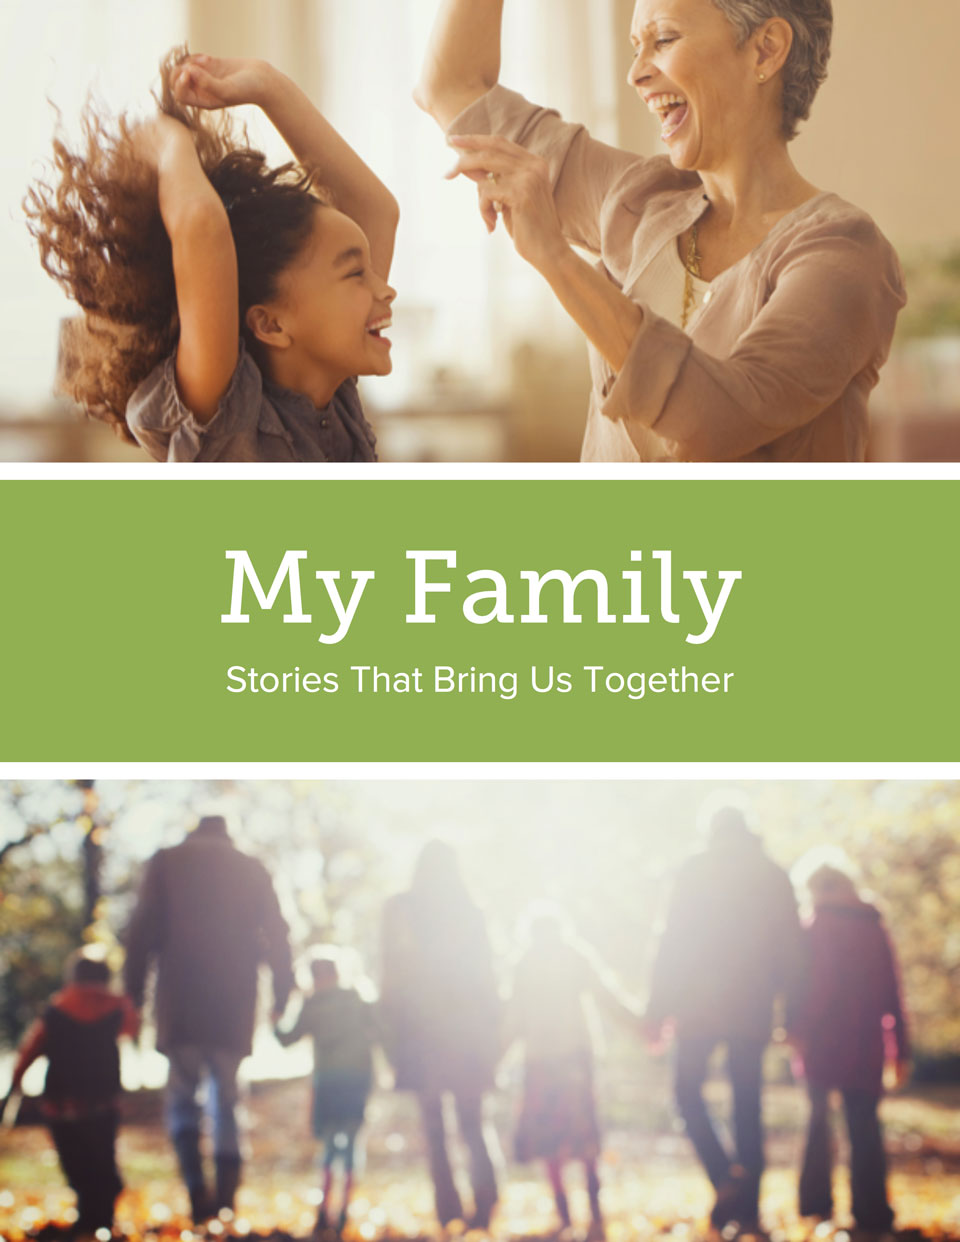 My Family Booklet